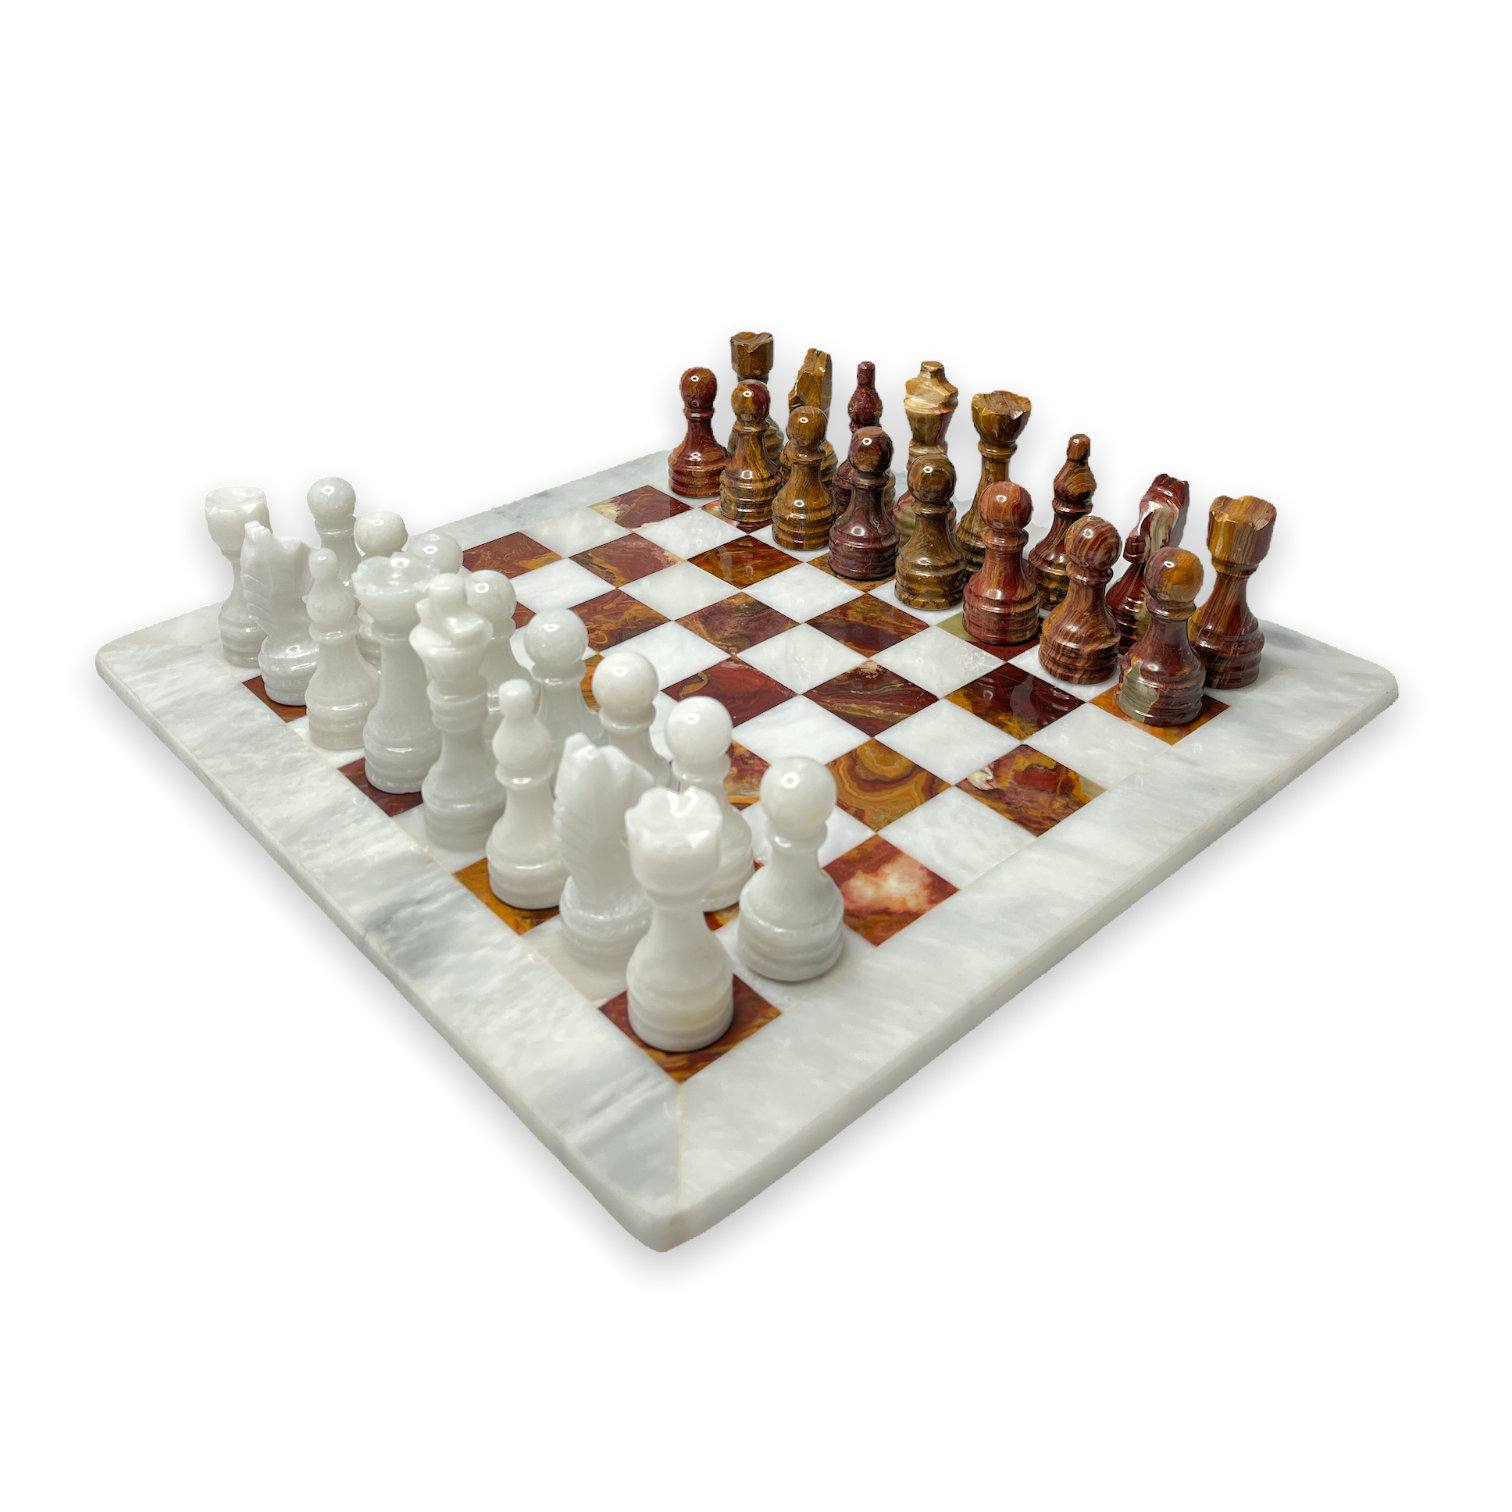  Radicaln Marble Chess Set 12 Inches Red and Coral Handmade  Board Games for Adults - Board Games 1 Chess Board Games Board & 32 Chess  Pieces - 2 Player Games for Adults : Toys & Games